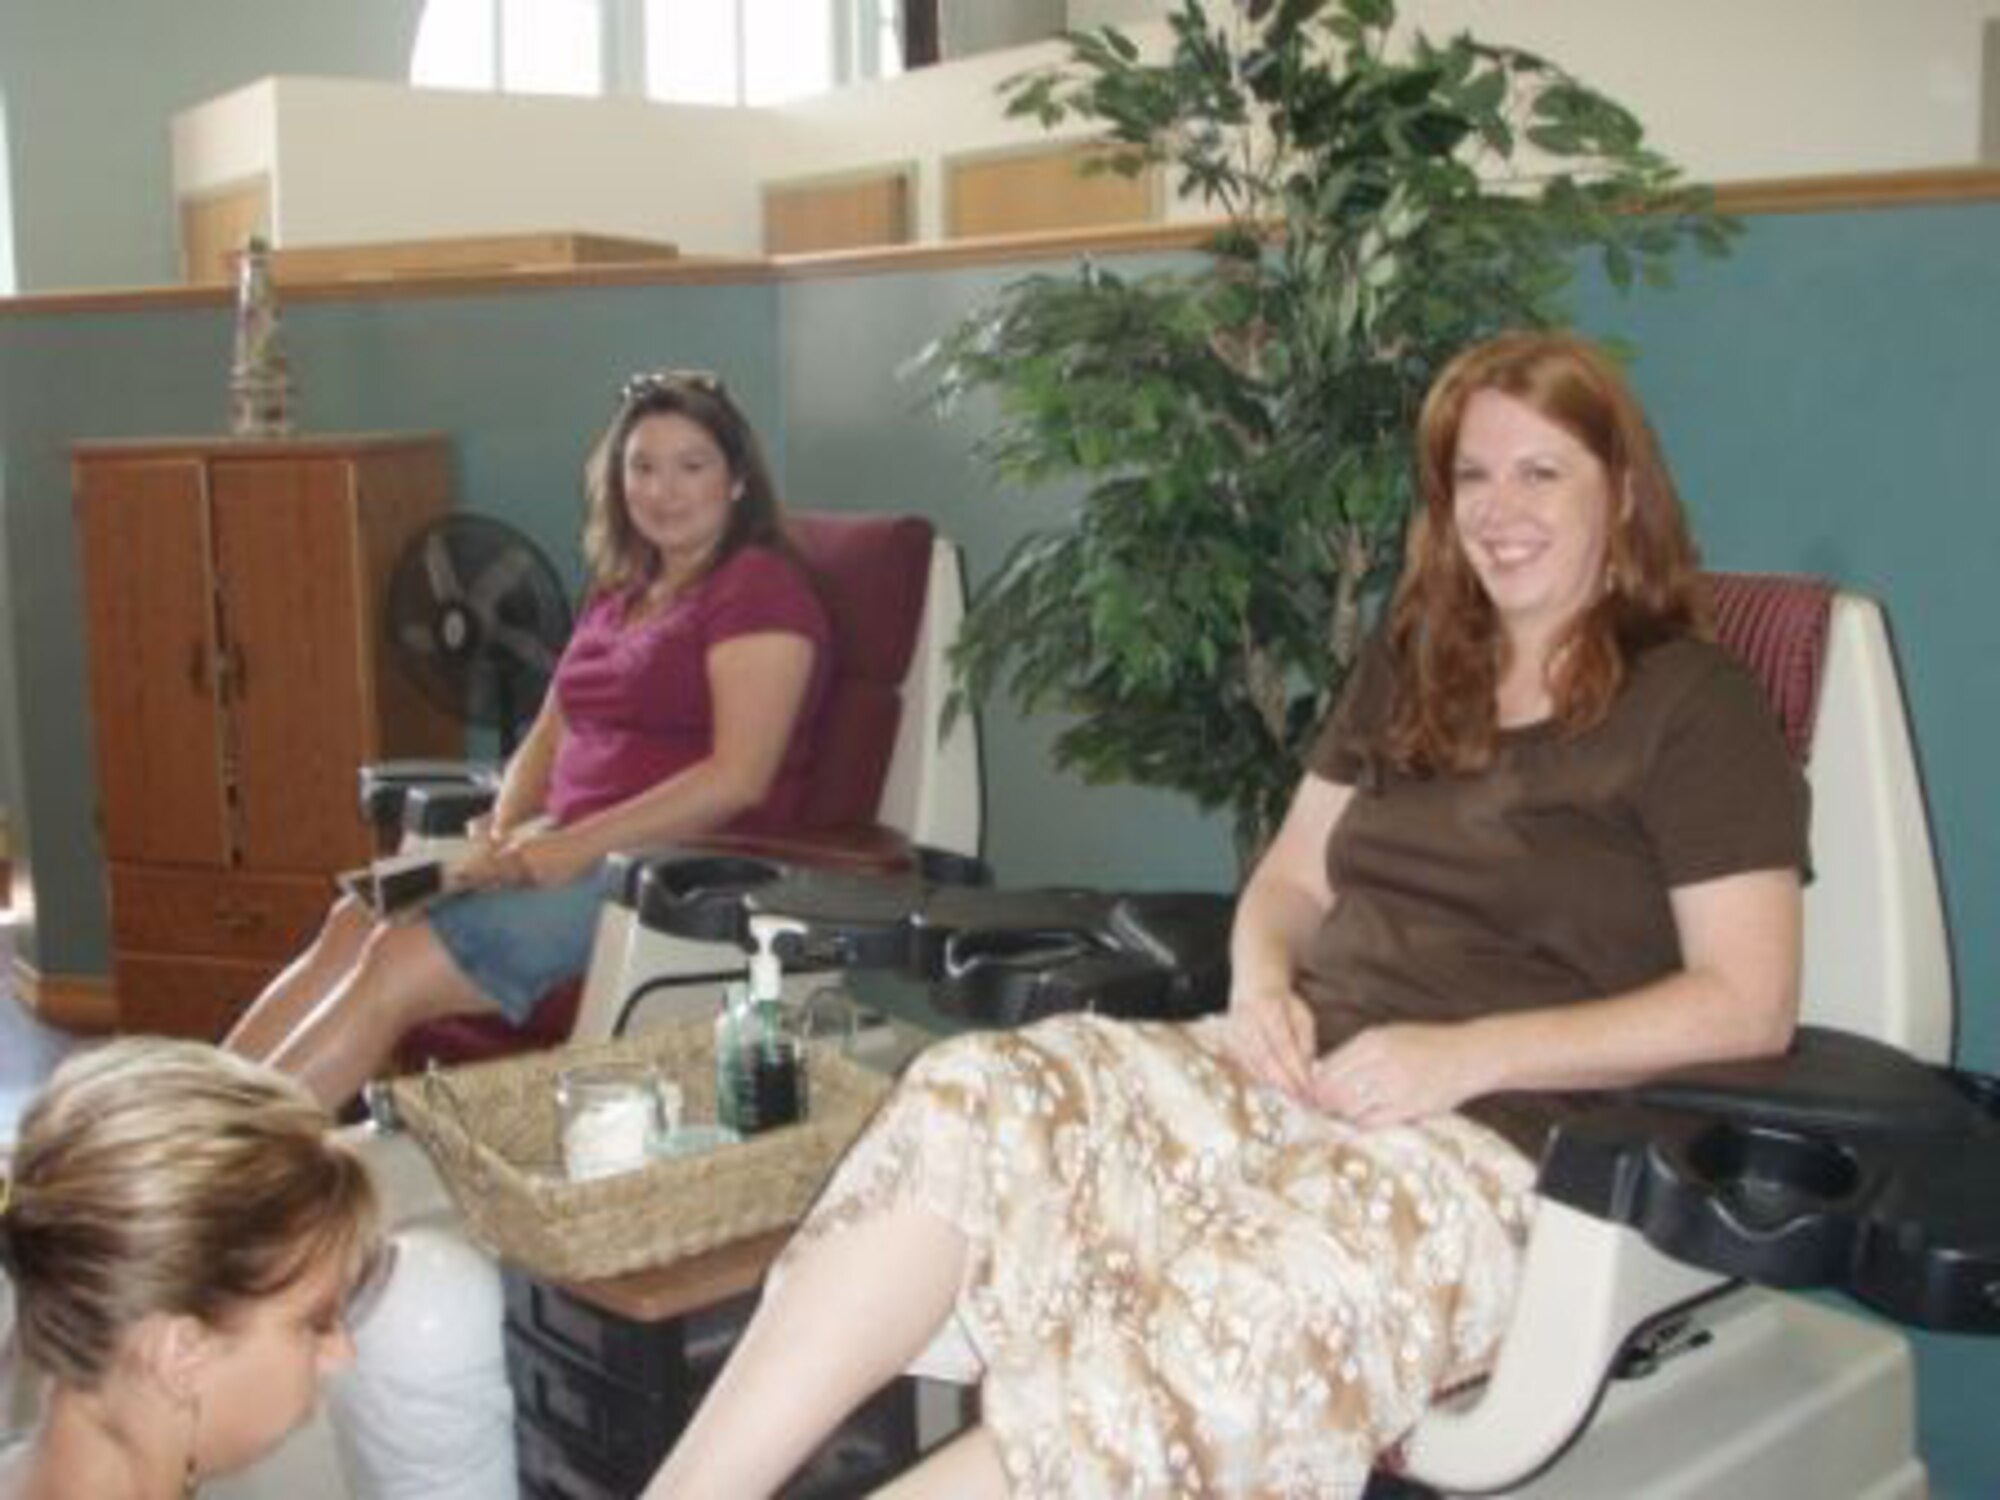 GRAND FORKS AIR FORCE BASE, N.D. -- Military spouses enjoy a pedicure at a local spa while their husbands are deployed. The event was made possible by a donation from TriWest. In addition to the visit to the spa, free childcare at the children's development center here was offered by a donation from the Air Force Aid Society. (courtesy photo)